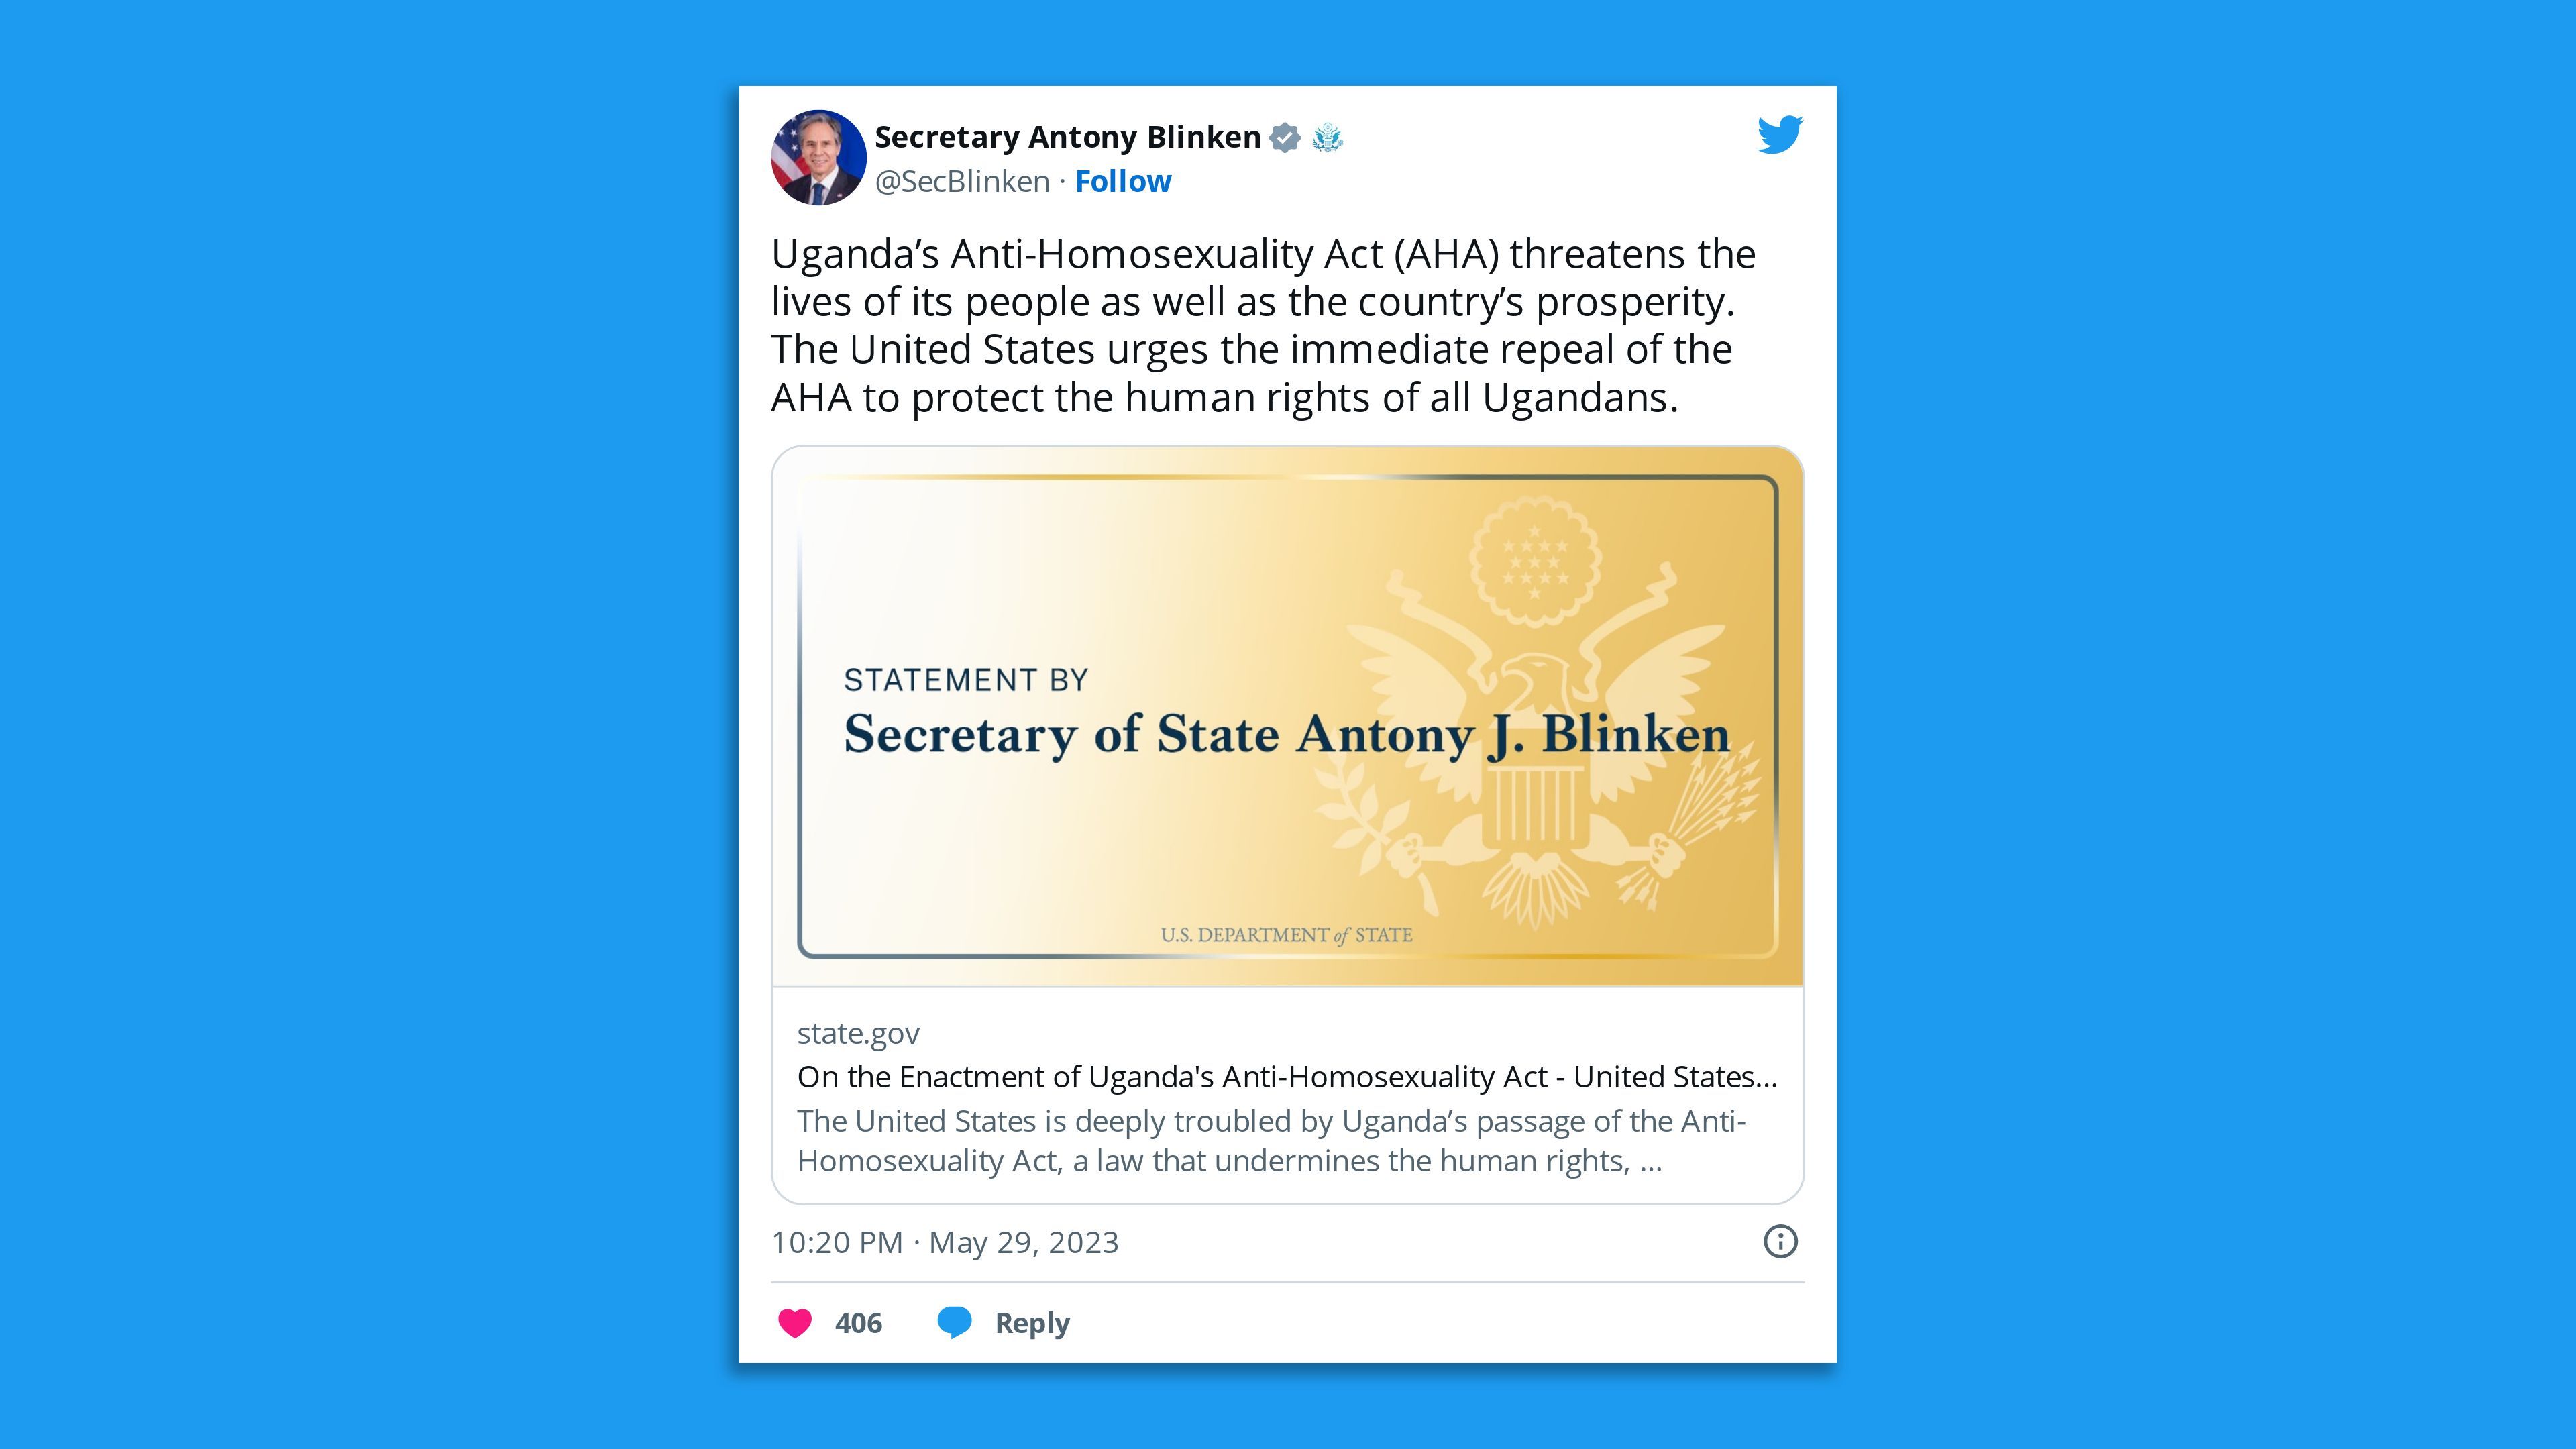 A screenshot of a tweet by U.S. Secretary of State Tony Blinken, saying: "Uganda’s Anti-Homosexuality Act (AHA) threatens the lives of its people as well as the country’s prosperity. The United States urges the immediate repeal of the AHA to protect the human rights of all Ugandans."